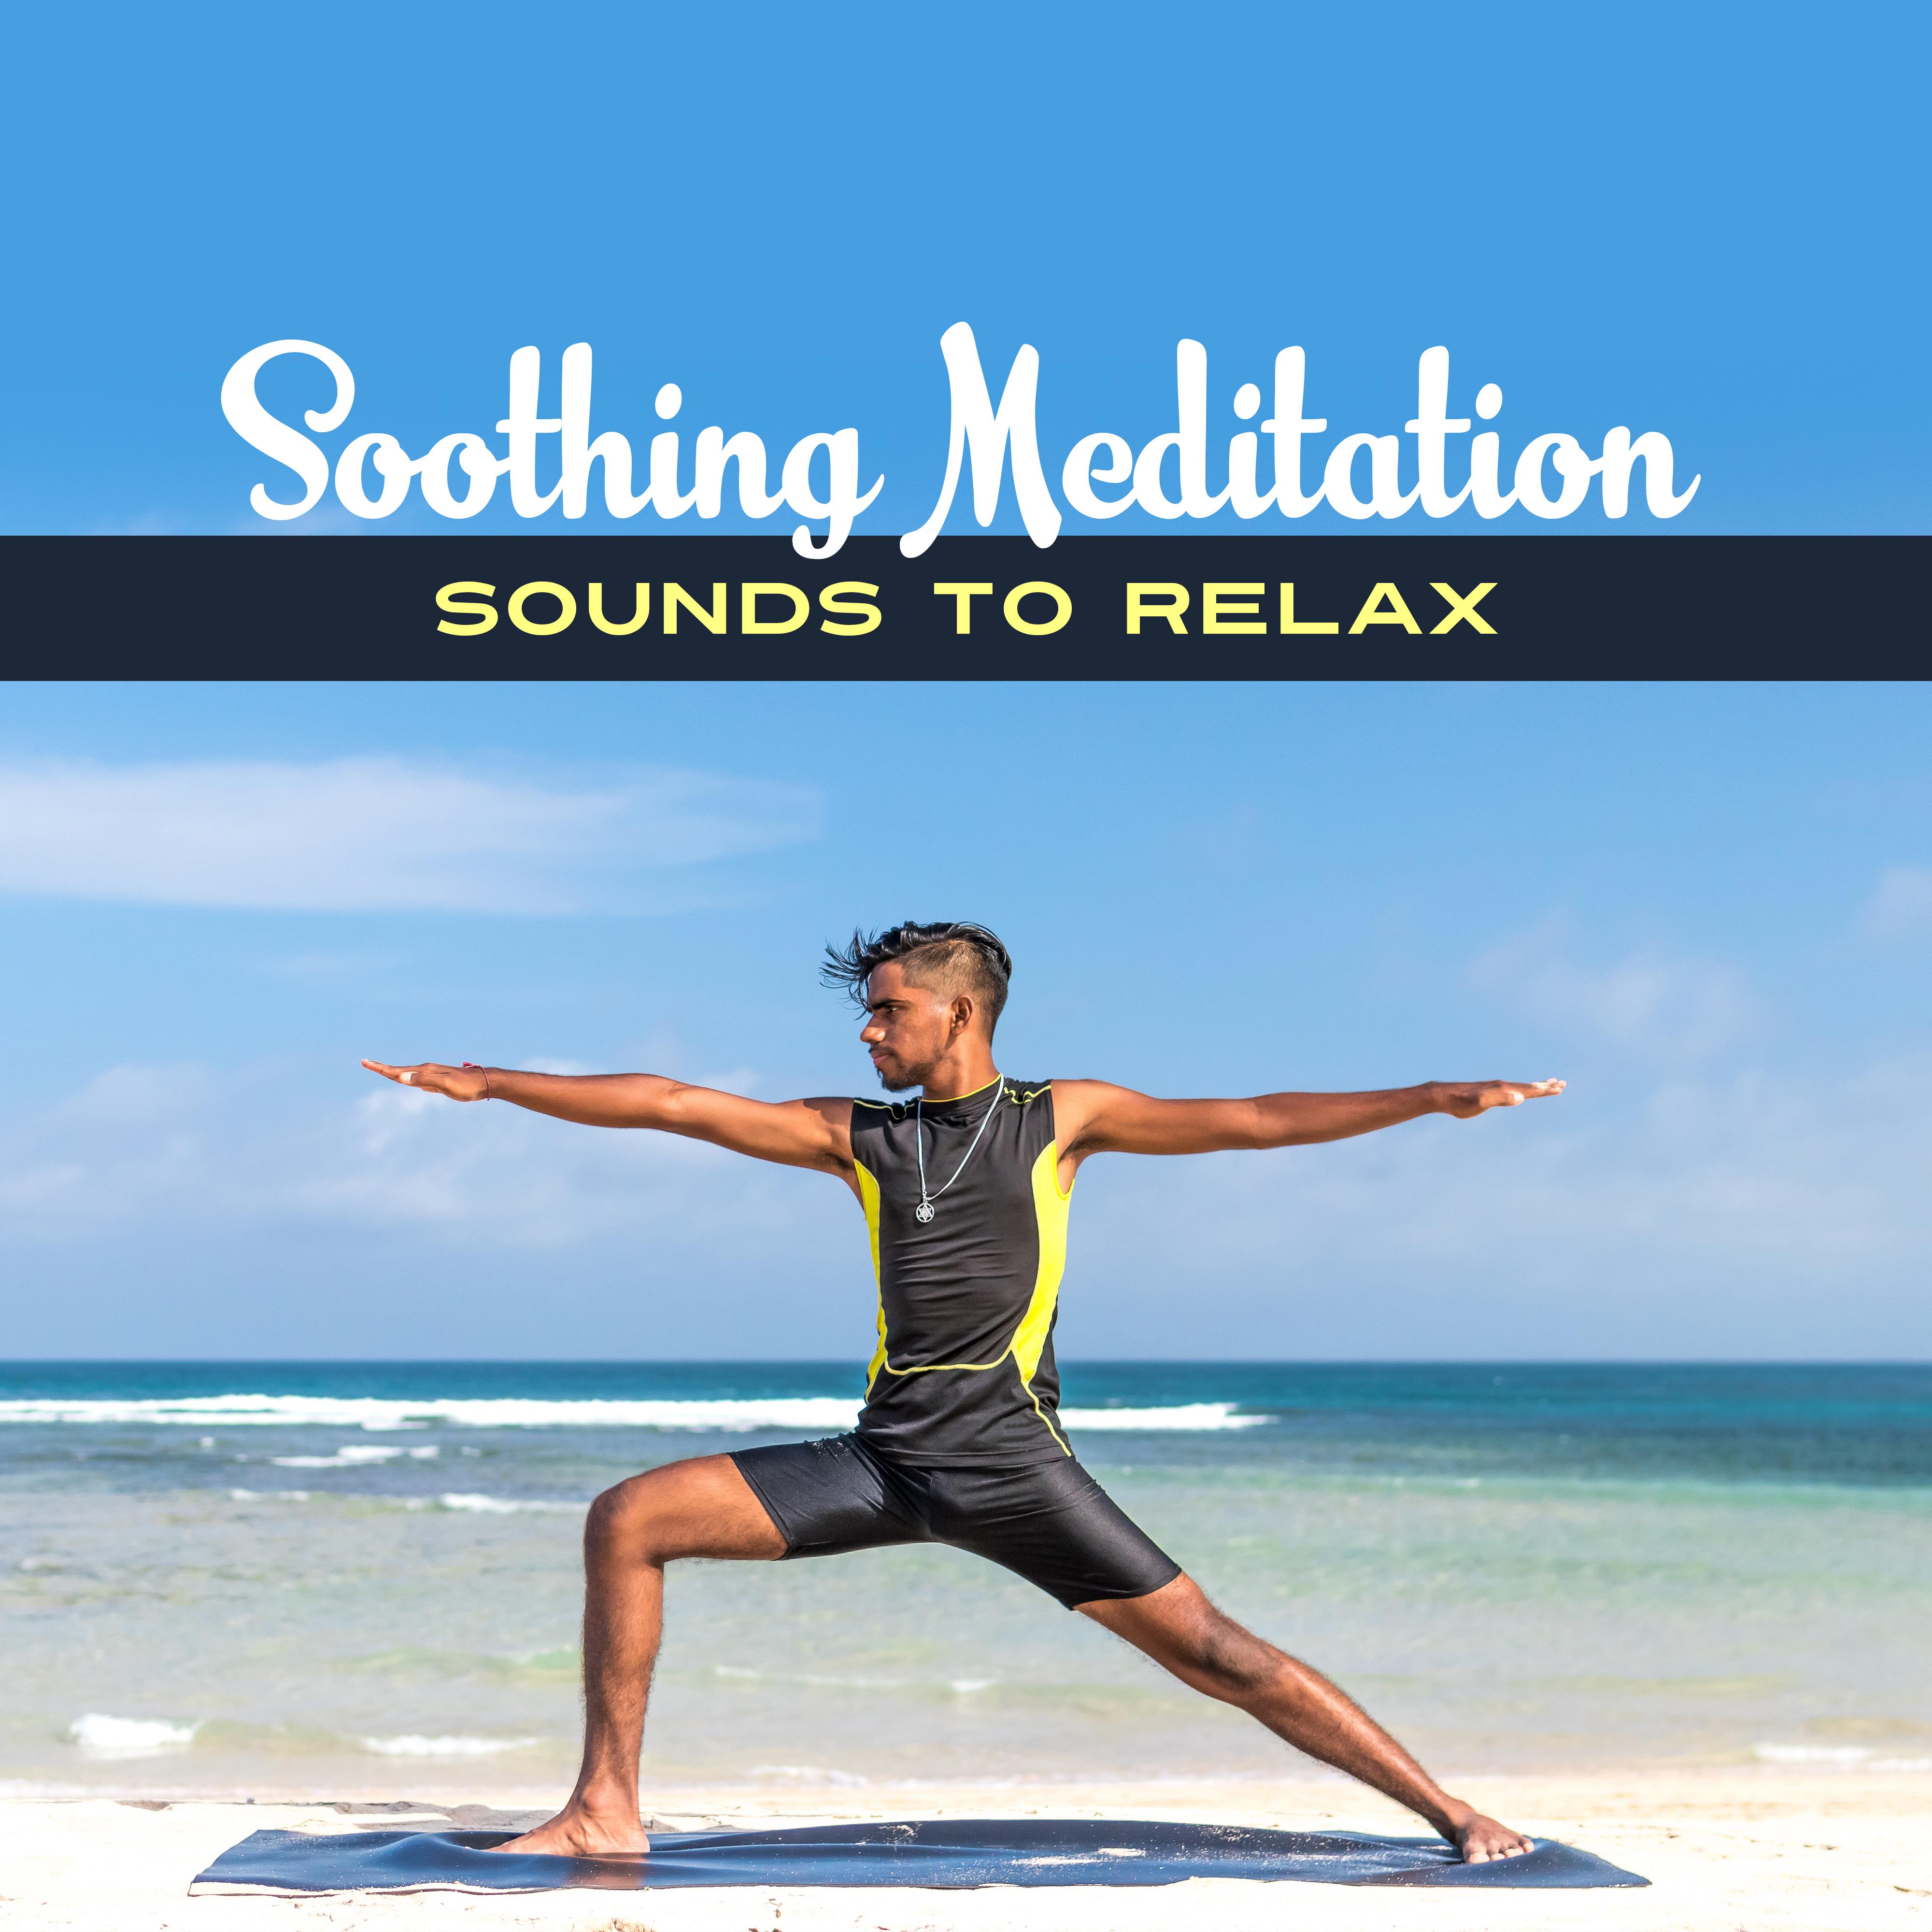 Soothing Meditation Sounds to Relax  Calm Music to Rest, Stress Relief, Healing Waves to Relax, Meditation Sounds